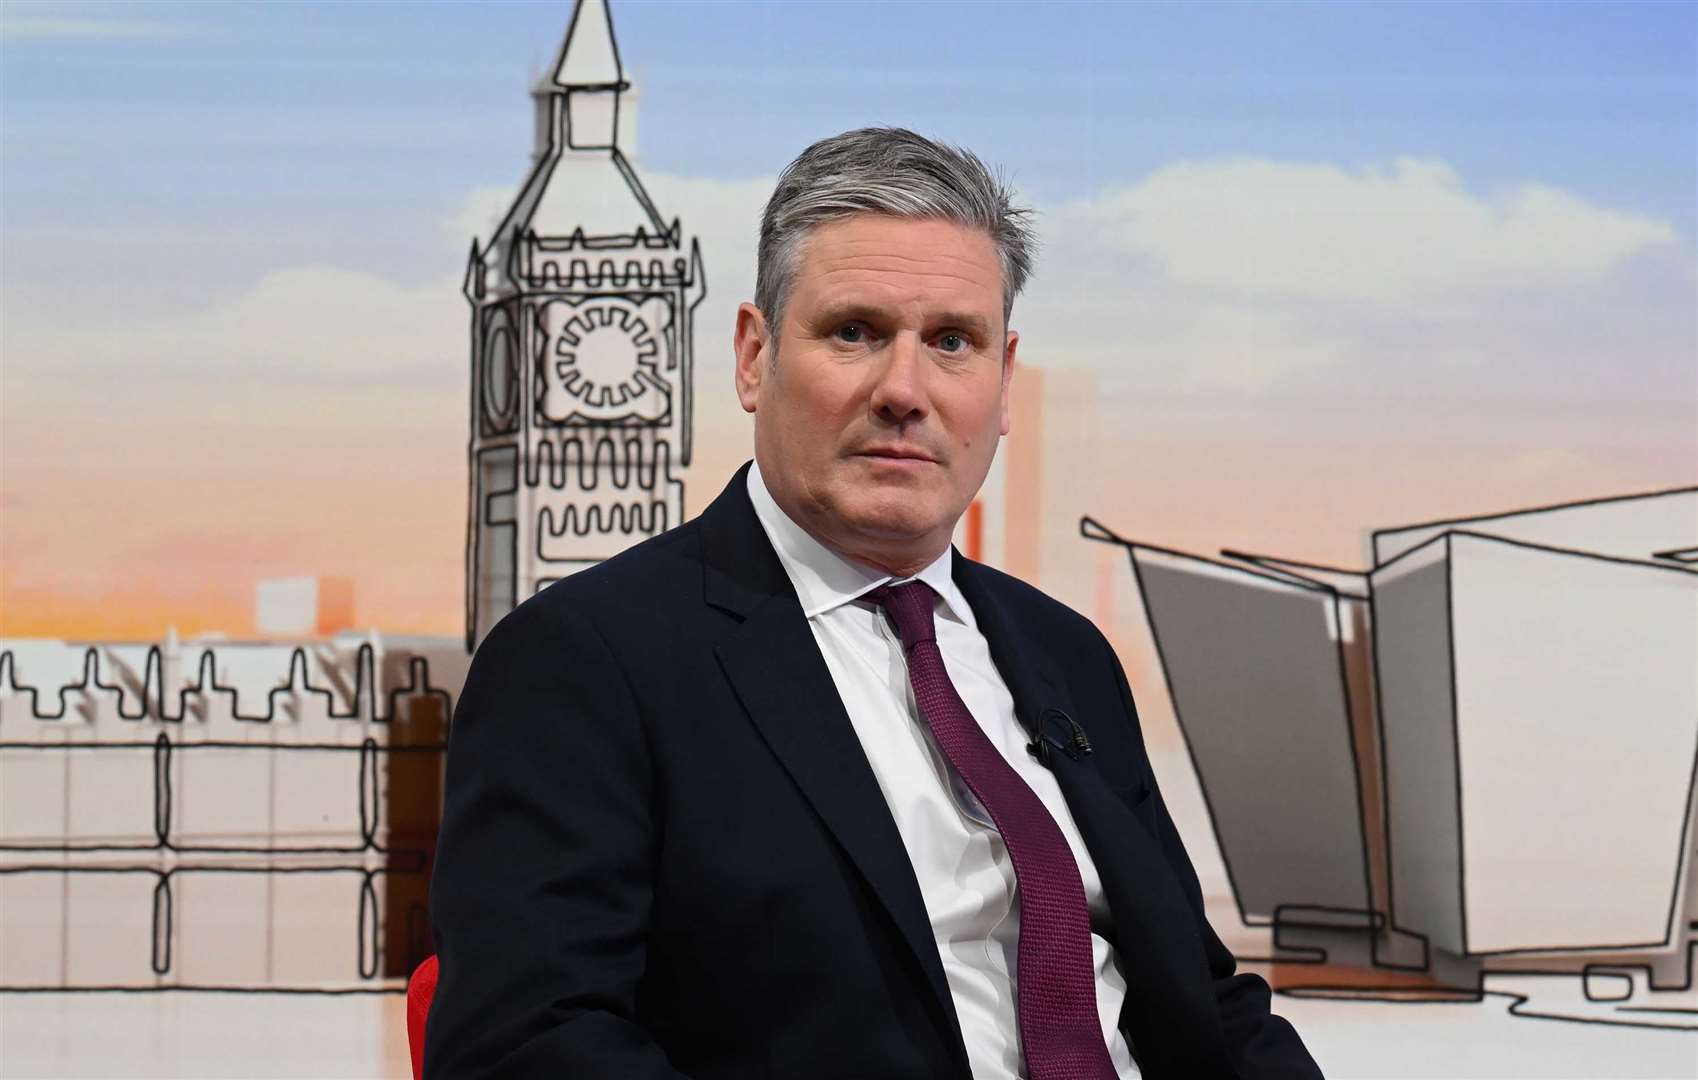 Sir Keir Starmer has said Labour will not overturn the policy if they get into power (Jeff Overs/BBC)